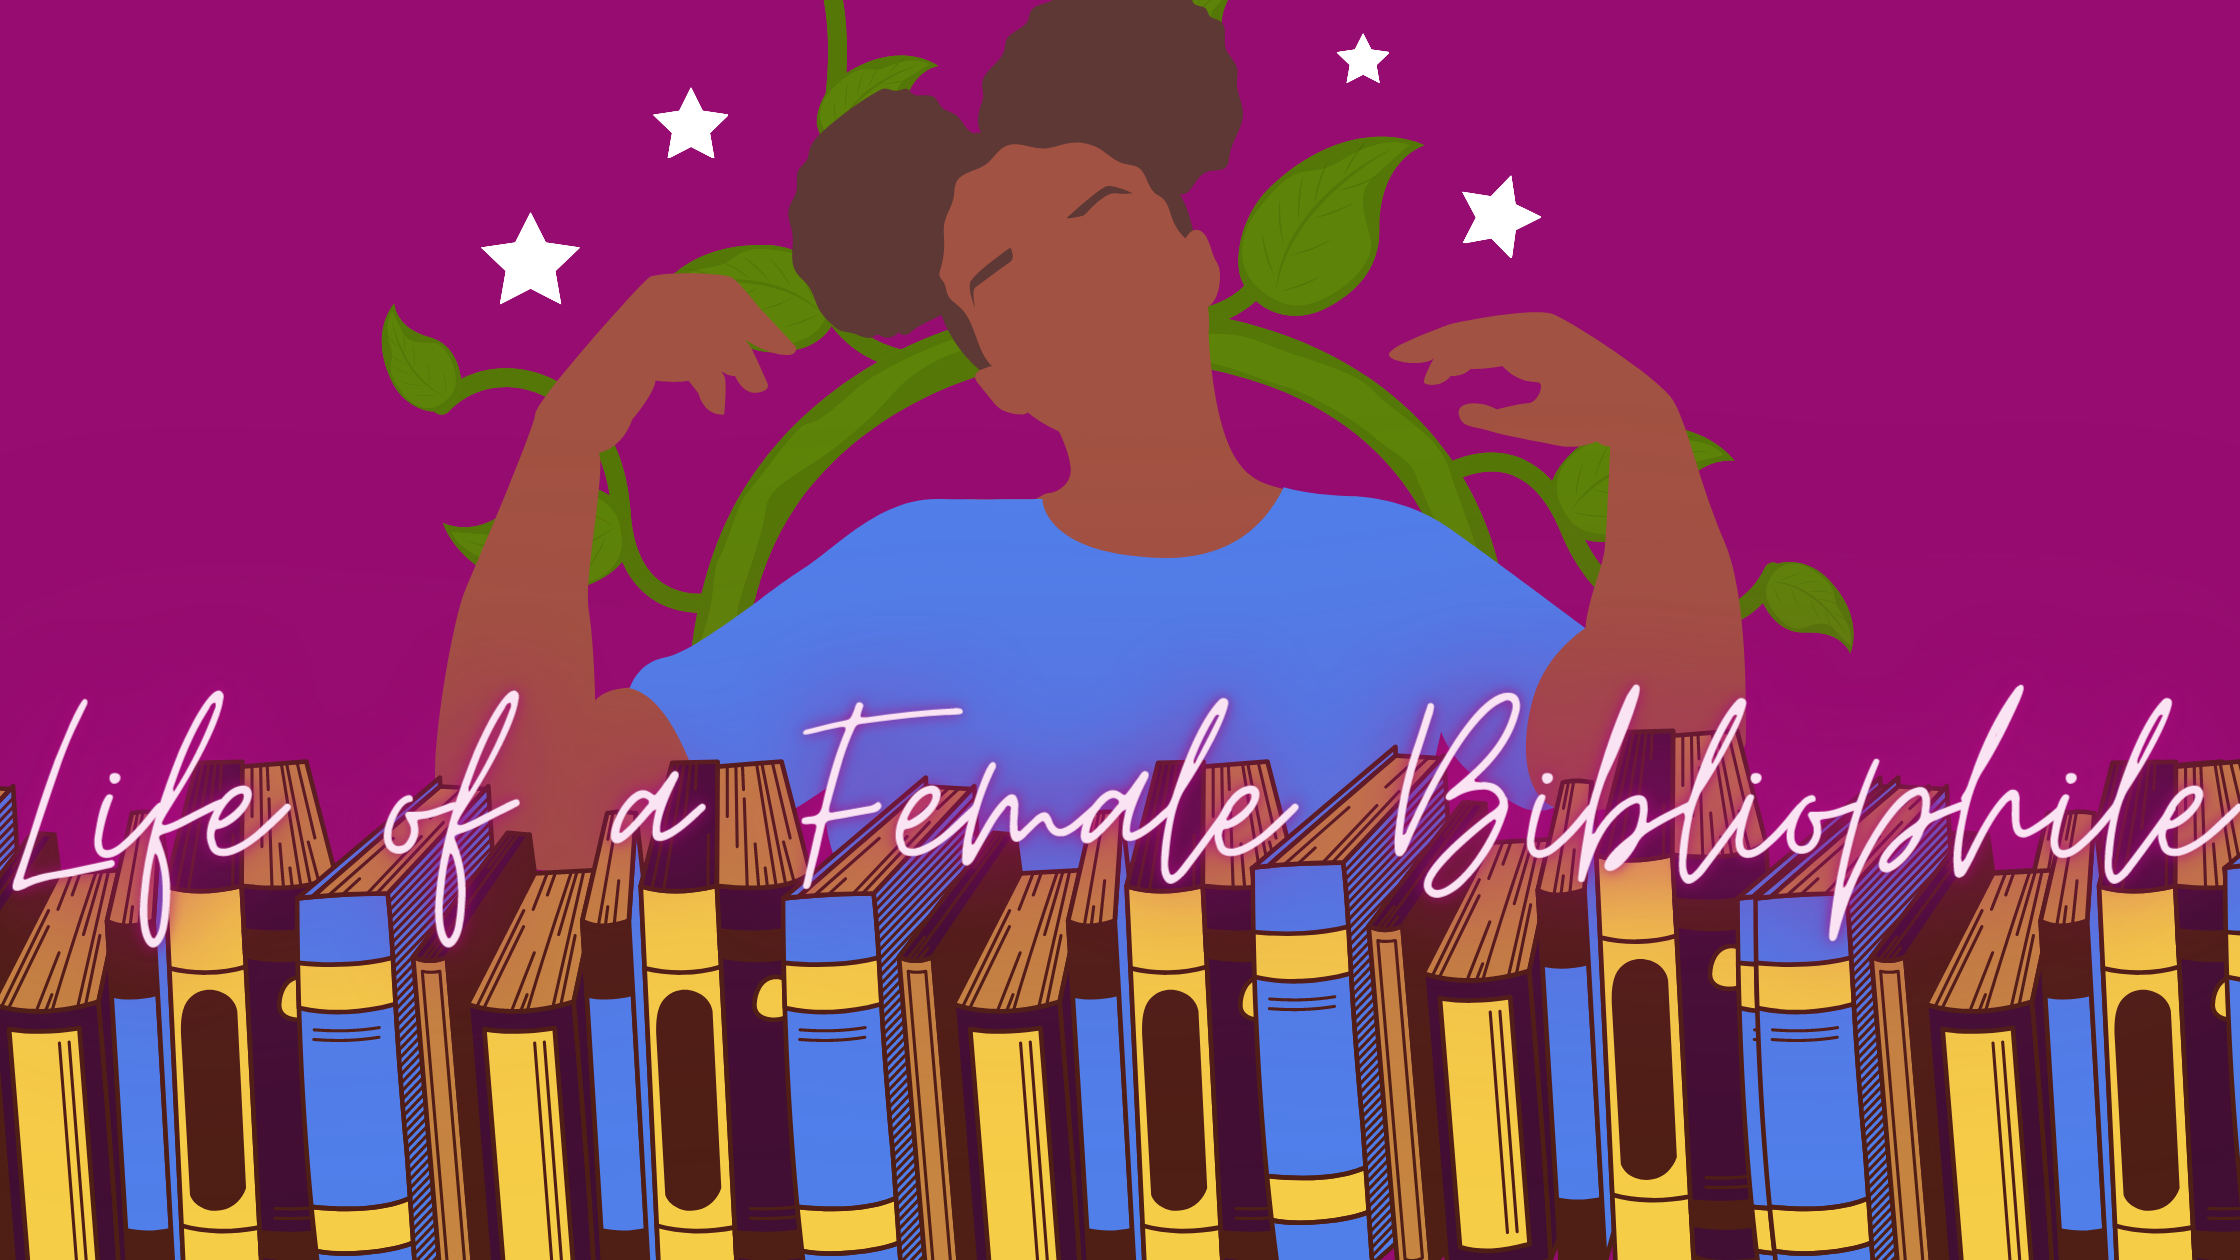 Fictional Libraries I Love – Life of a Female Bibliophile